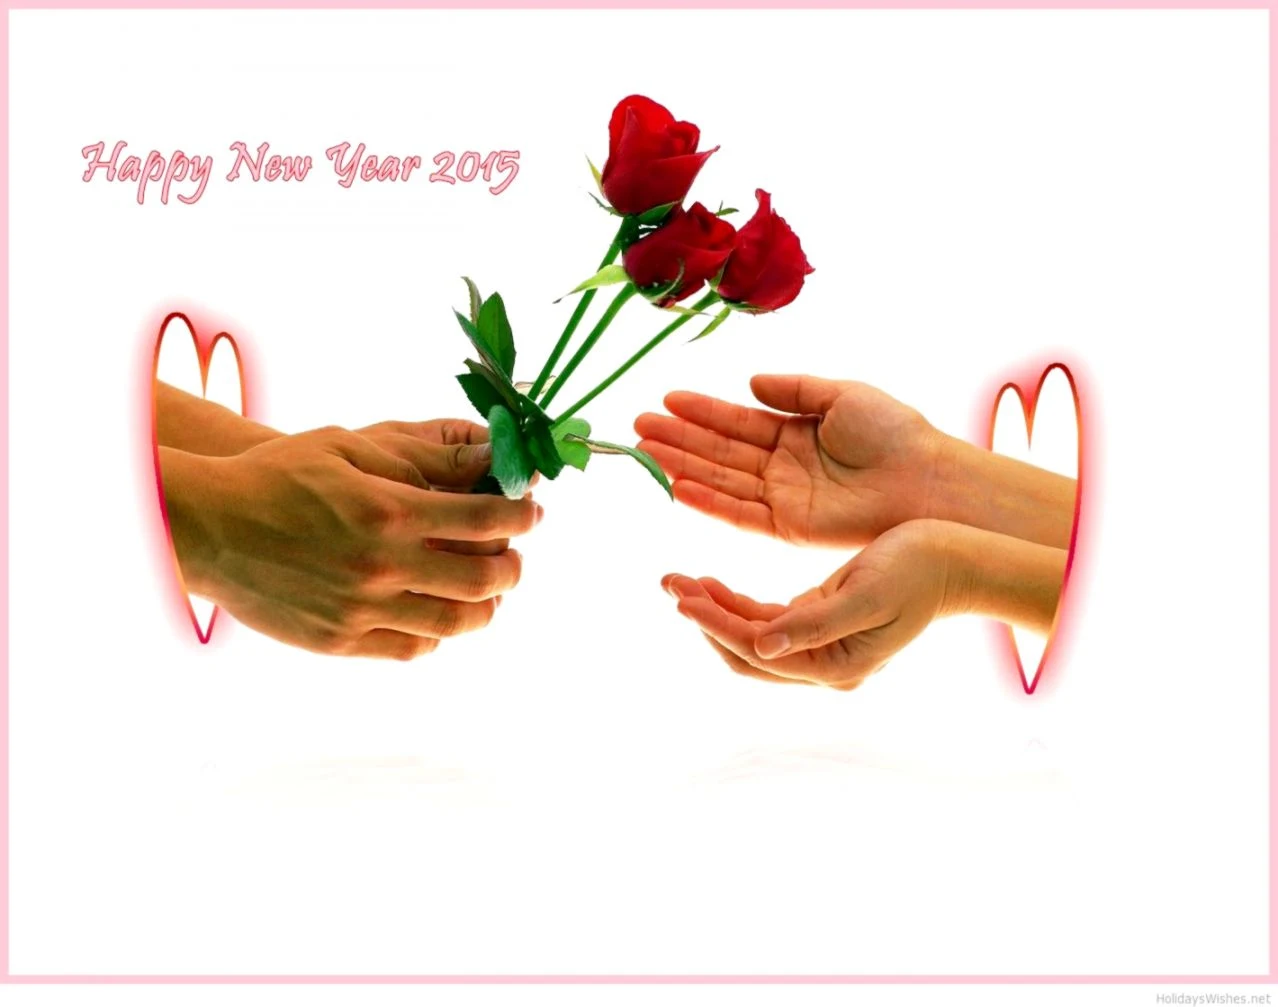 Happy New Year Love Free Wallpaper  HD Wallpapers Gallery